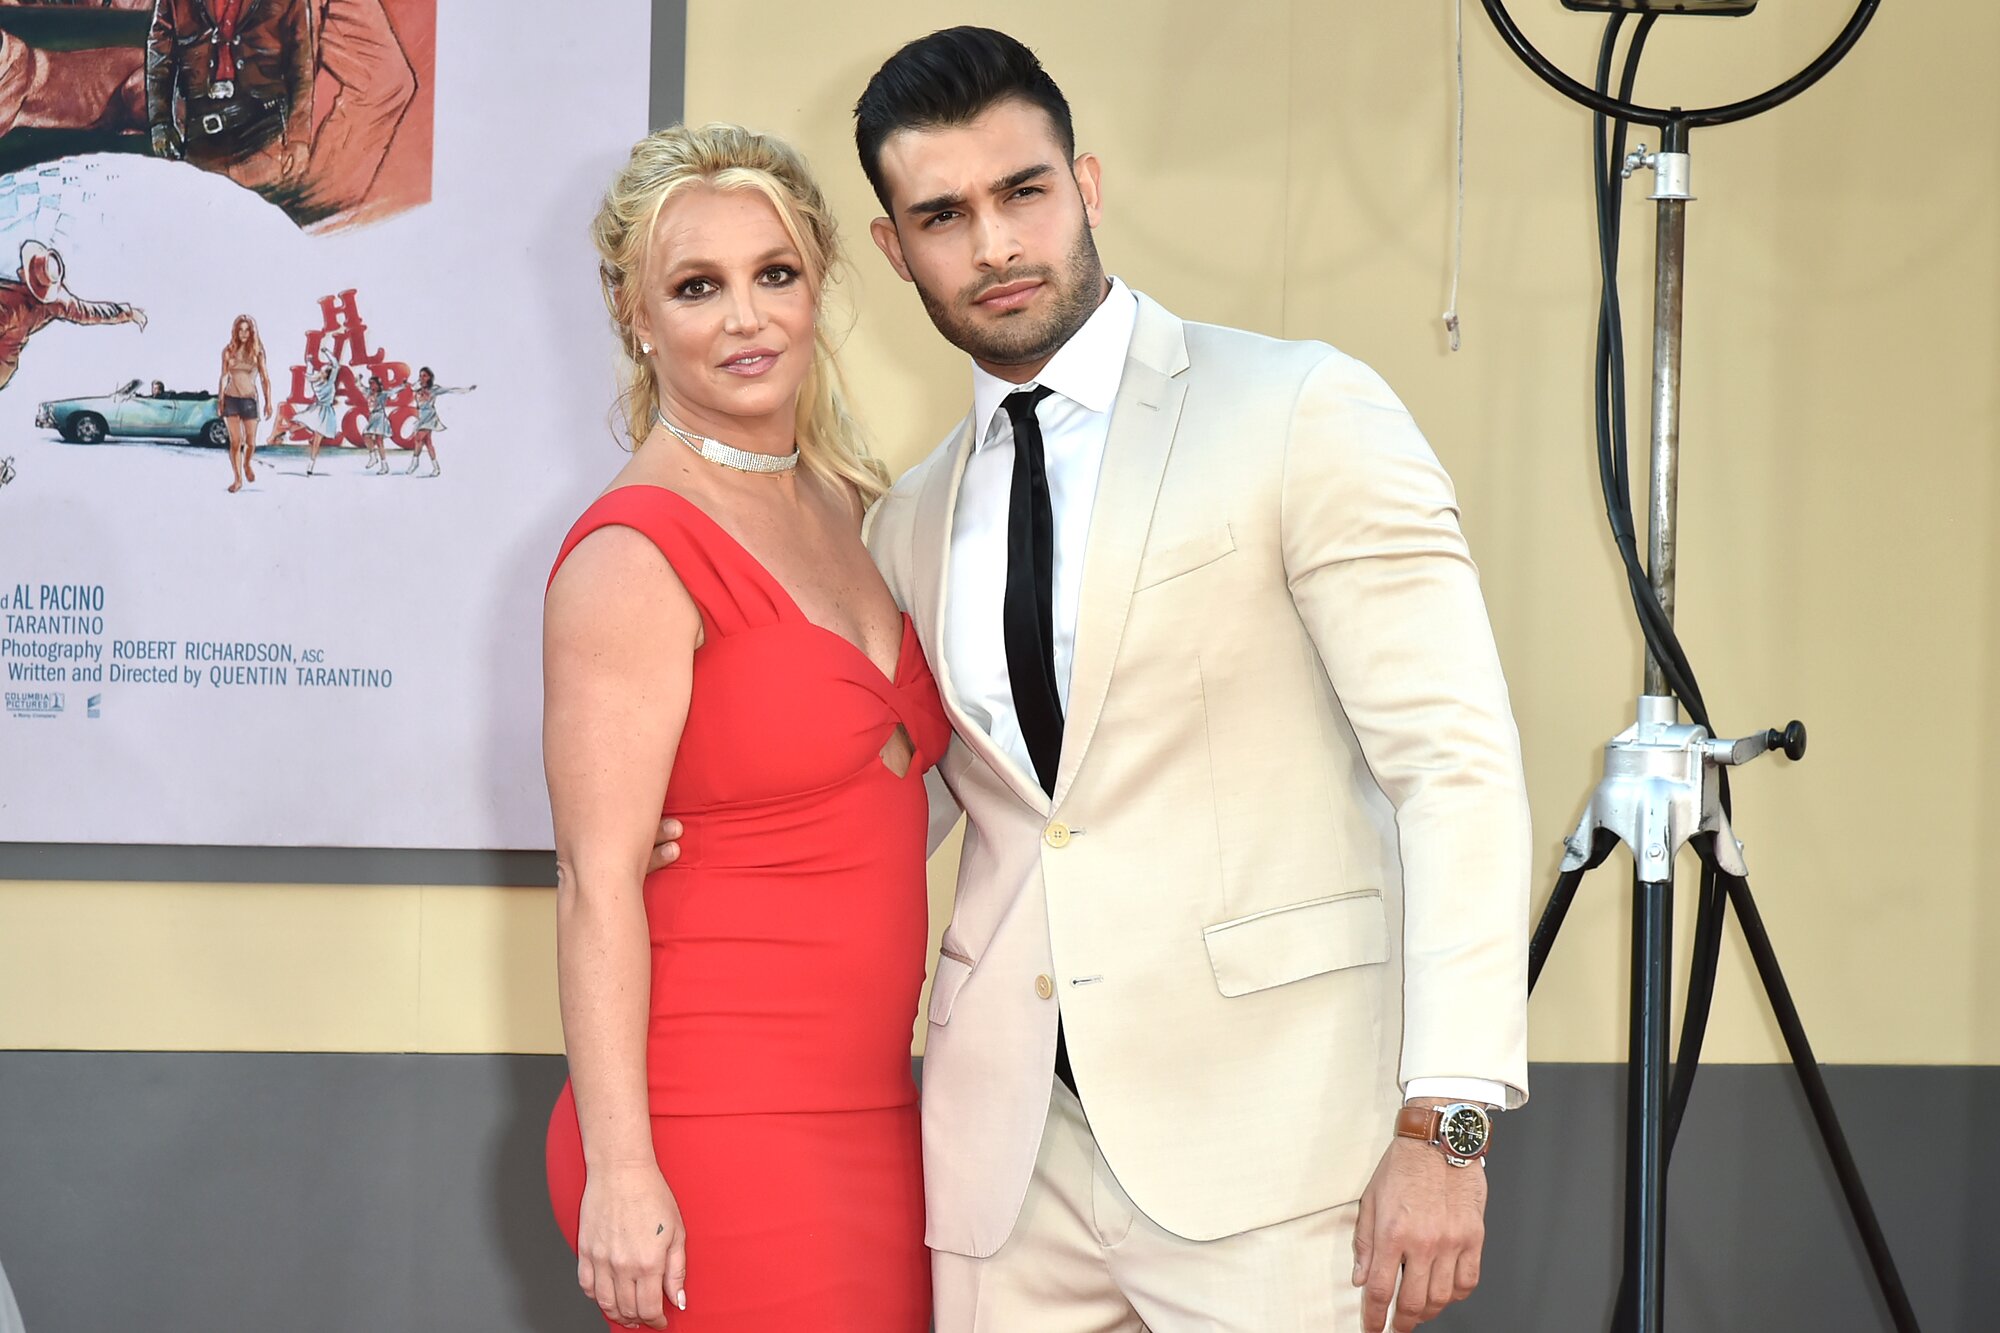 Britney Spears And Sam Asghari desperate for Engagement!